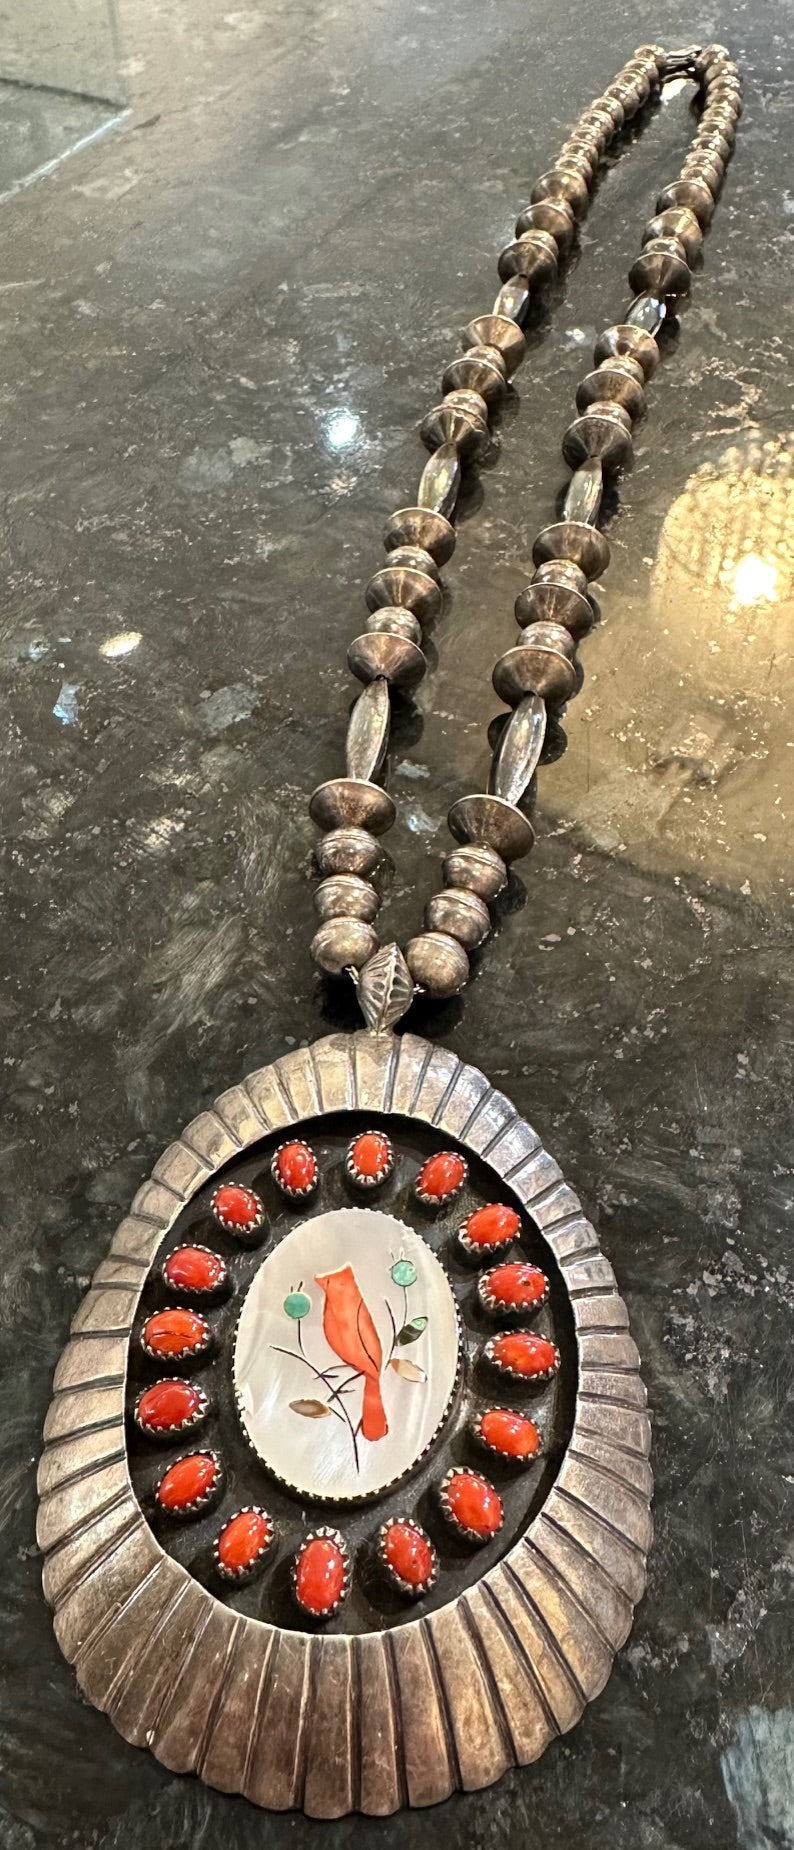 Absolutely Incredible Shadowbox Coral & Inlaid Mother of Pearl Cardinal Sterling Necklace, 23" Total plus 3" Cardinal Plaque